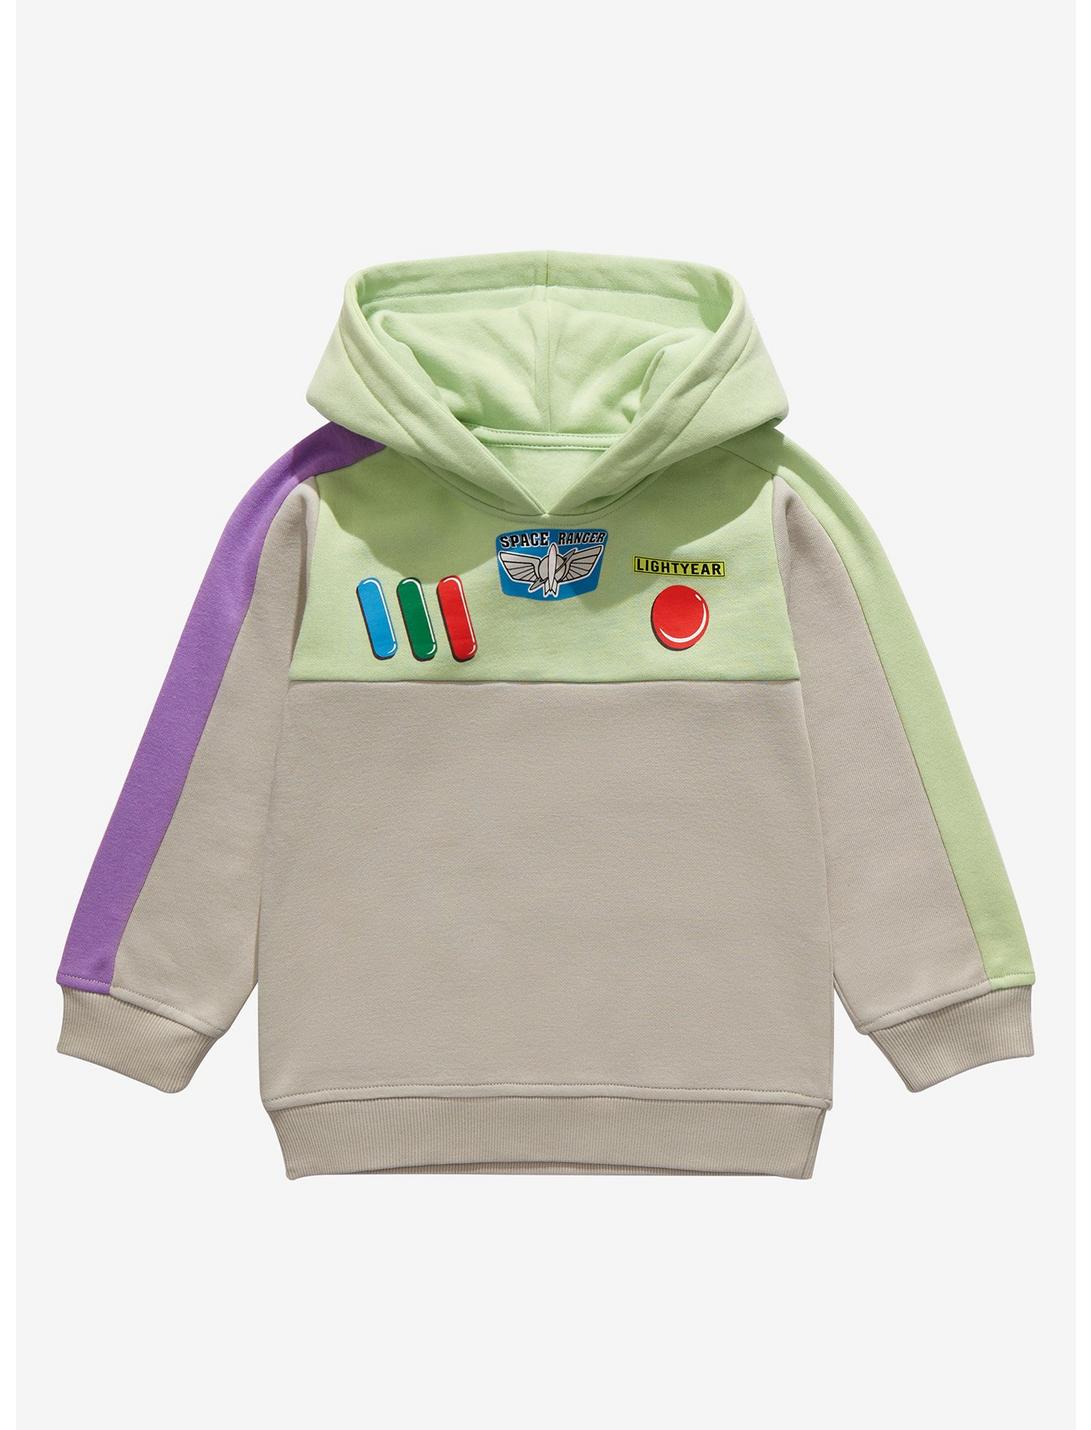 Disney Pixar Toy Story Buzz Lightyear Spacesuit Toddler Hoodie - BoxLunch Exclusive, LIGHT YEARS, hi-res